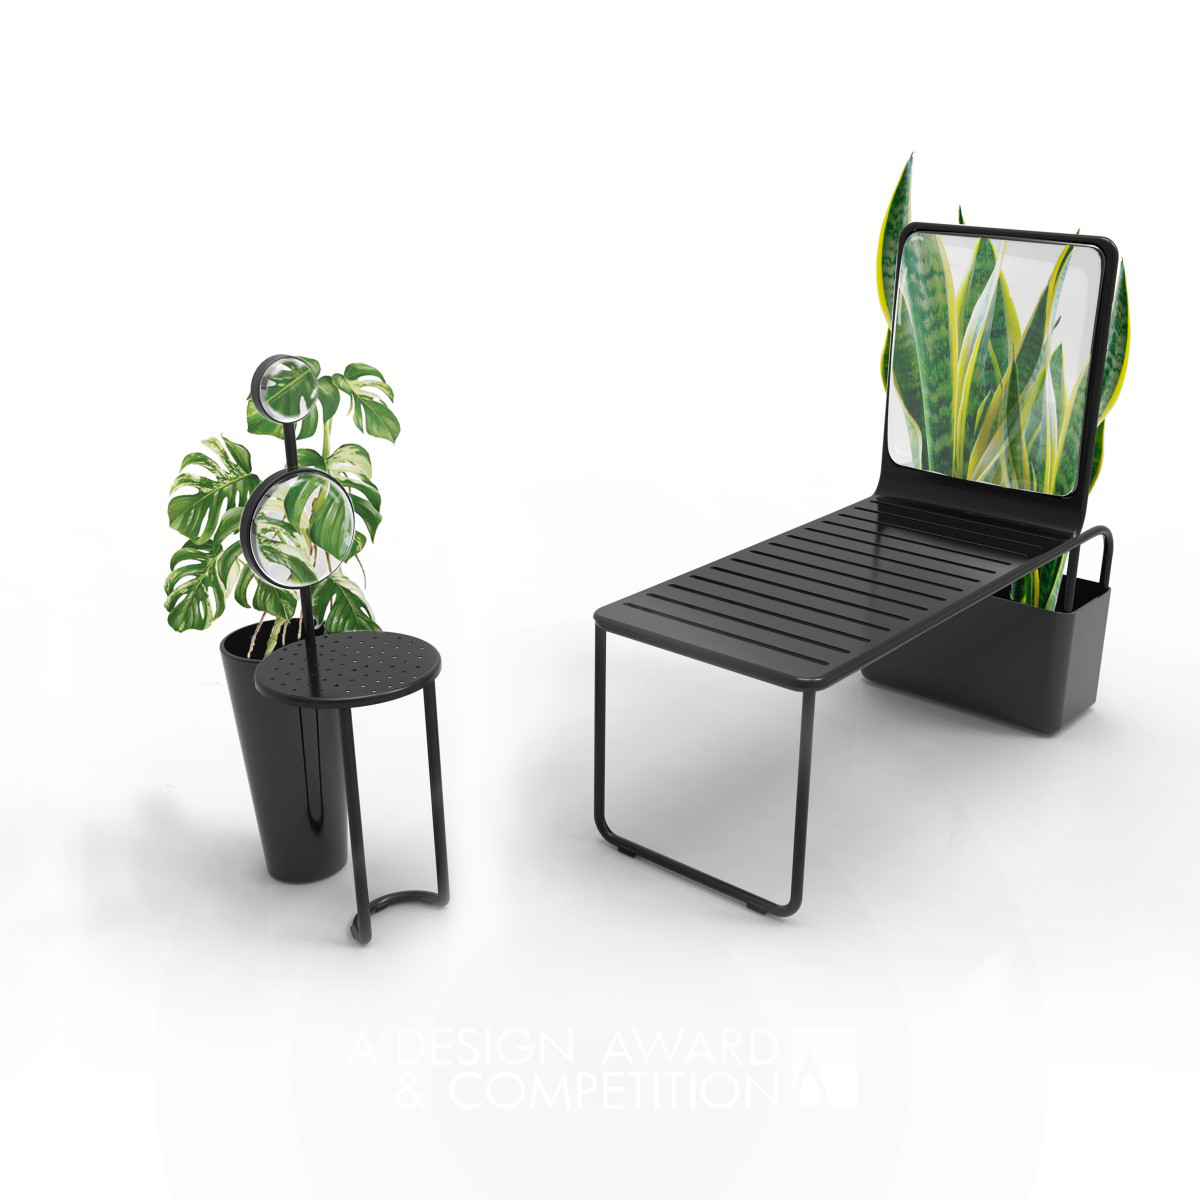 Mirror Chair Chair with magnifying glass and planter by Sha Yang